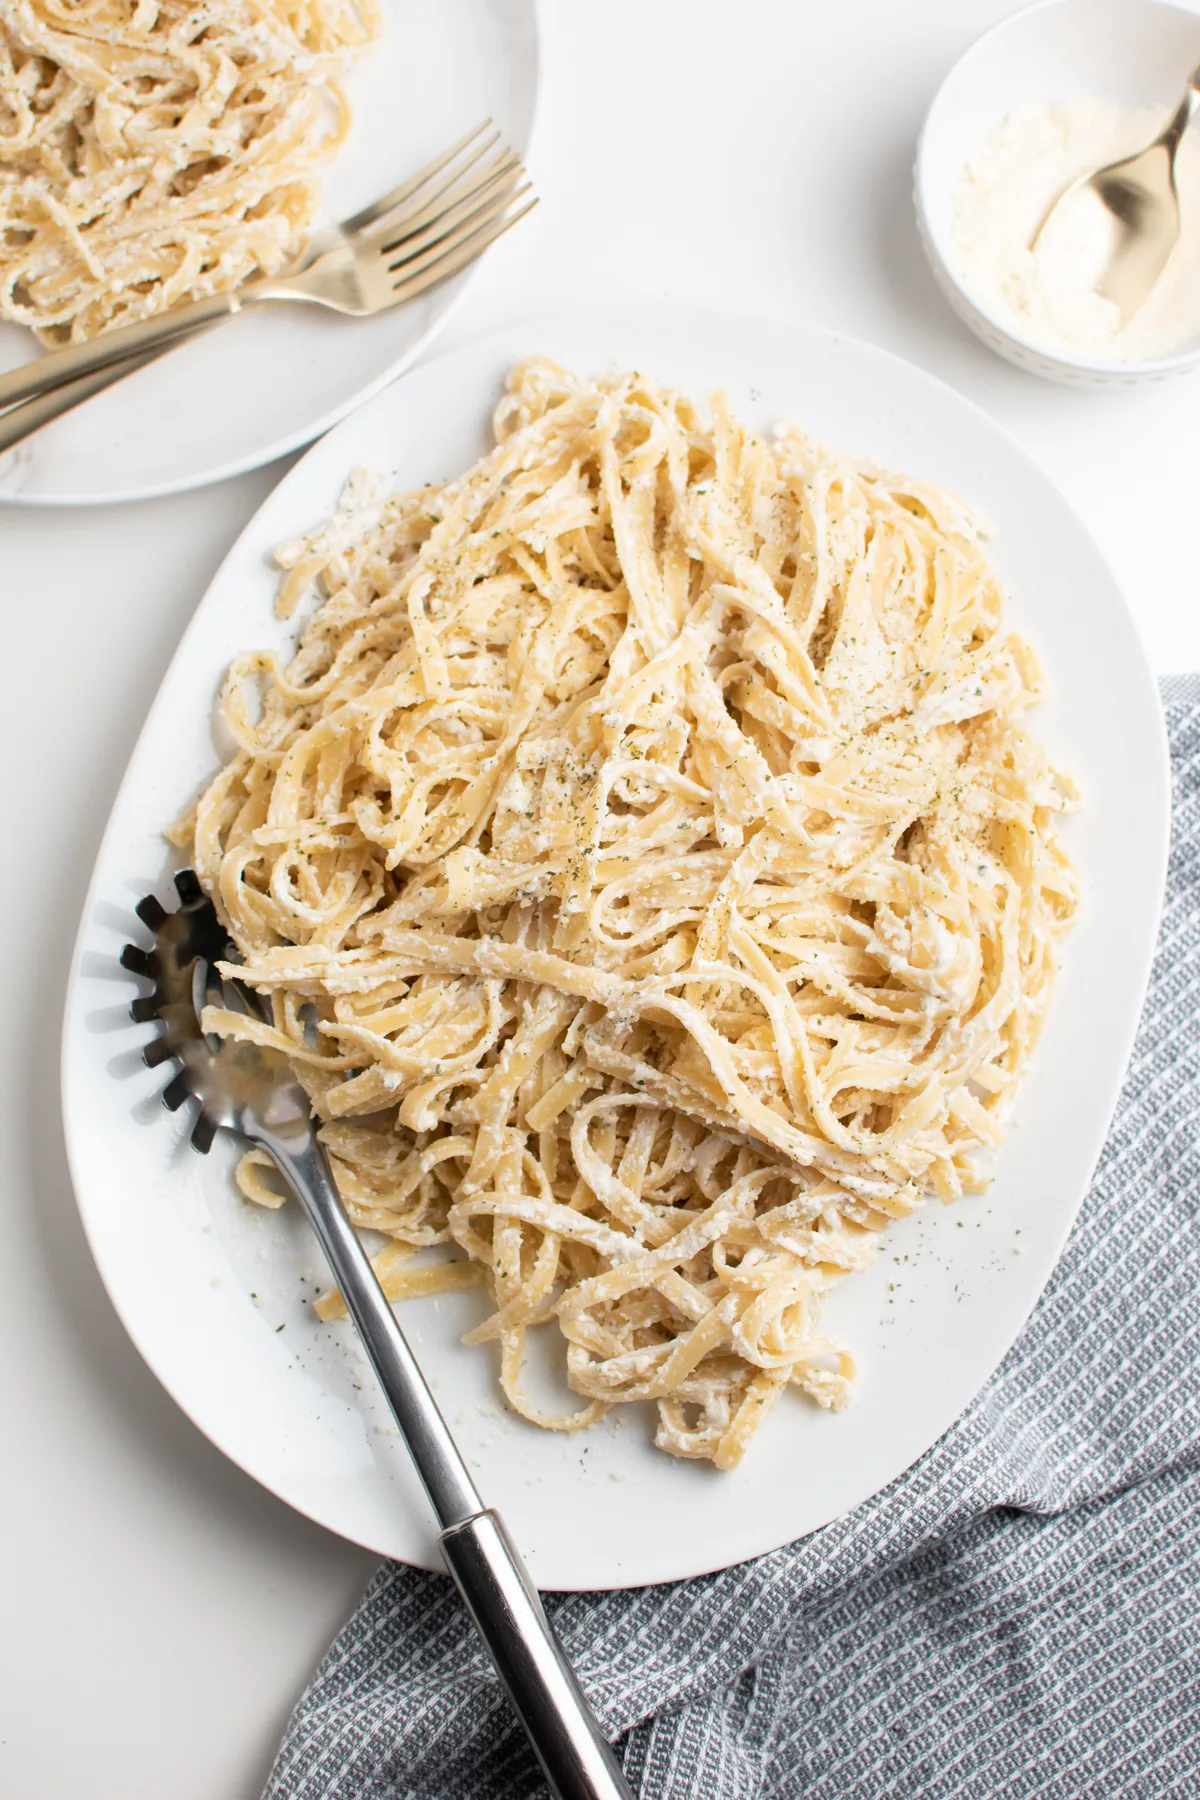 Skinny fettuccine alfredo on white platter with metal slotted spoon and kitchen towel.